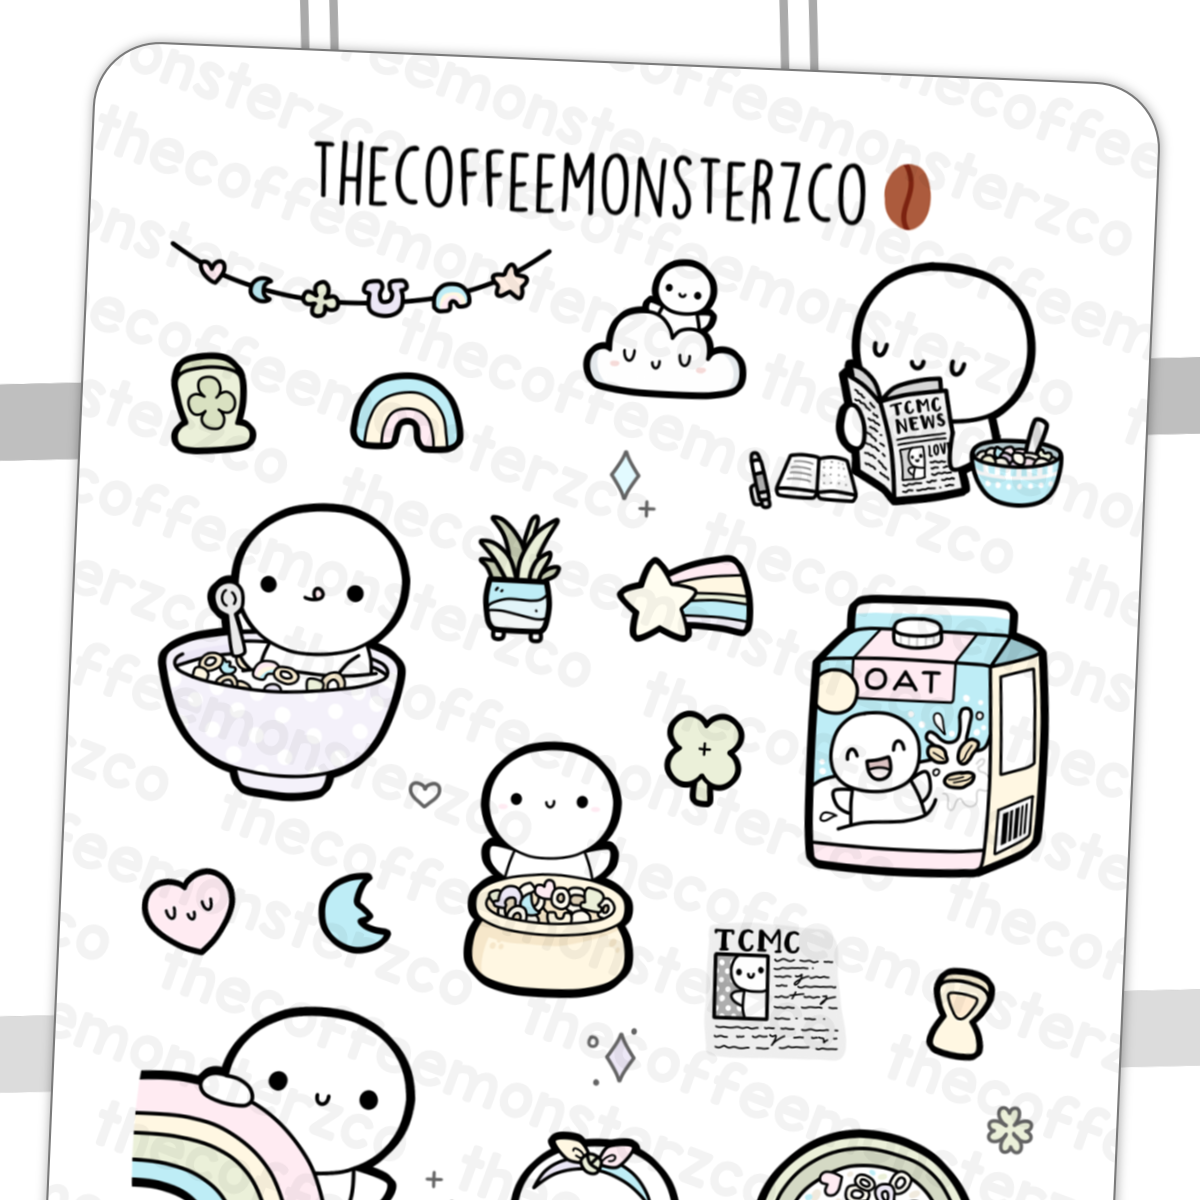 2 Sheets Stickers - Doodle Word Stickers, Black